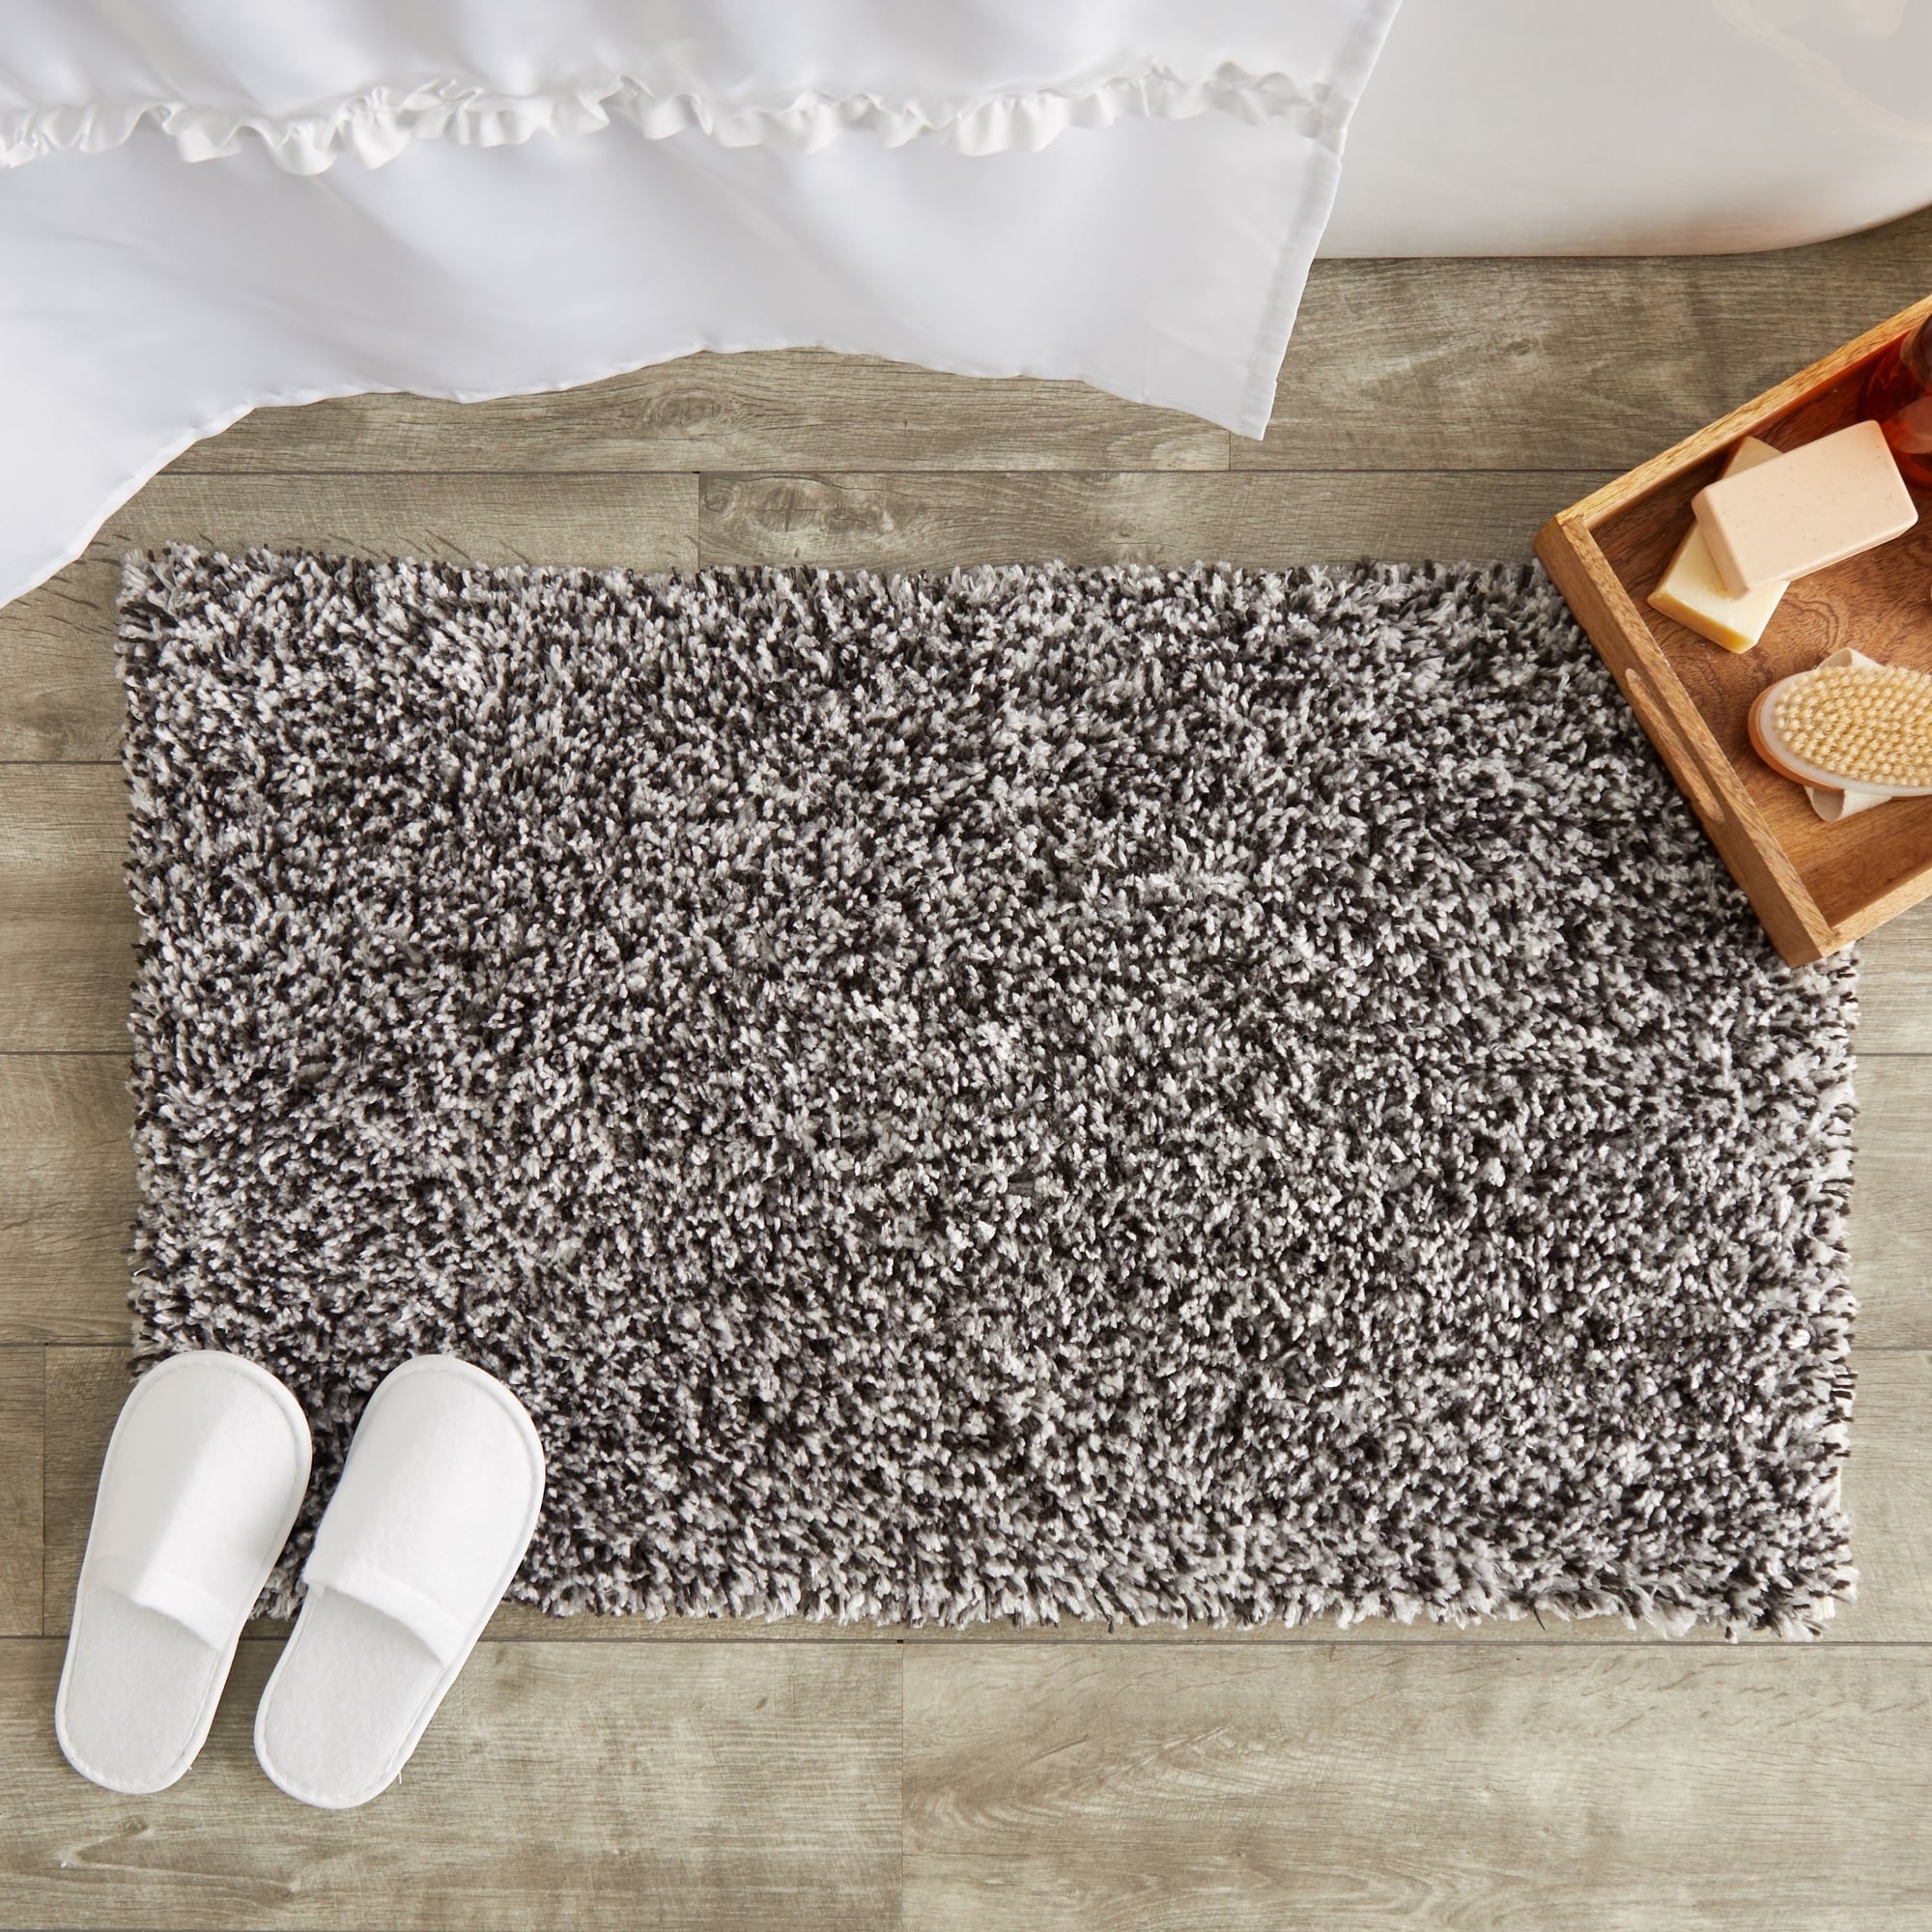 https://ak1.ostkcdn.com/images/products/is/images/direct/101d2deef7001129197468a8c569c4acaf352e14/Light-Grey-Bath-Mat%2C-Non-Slip-Bathroom-Rug-for-Showers-%2832-x-20-Inches%29.jpg